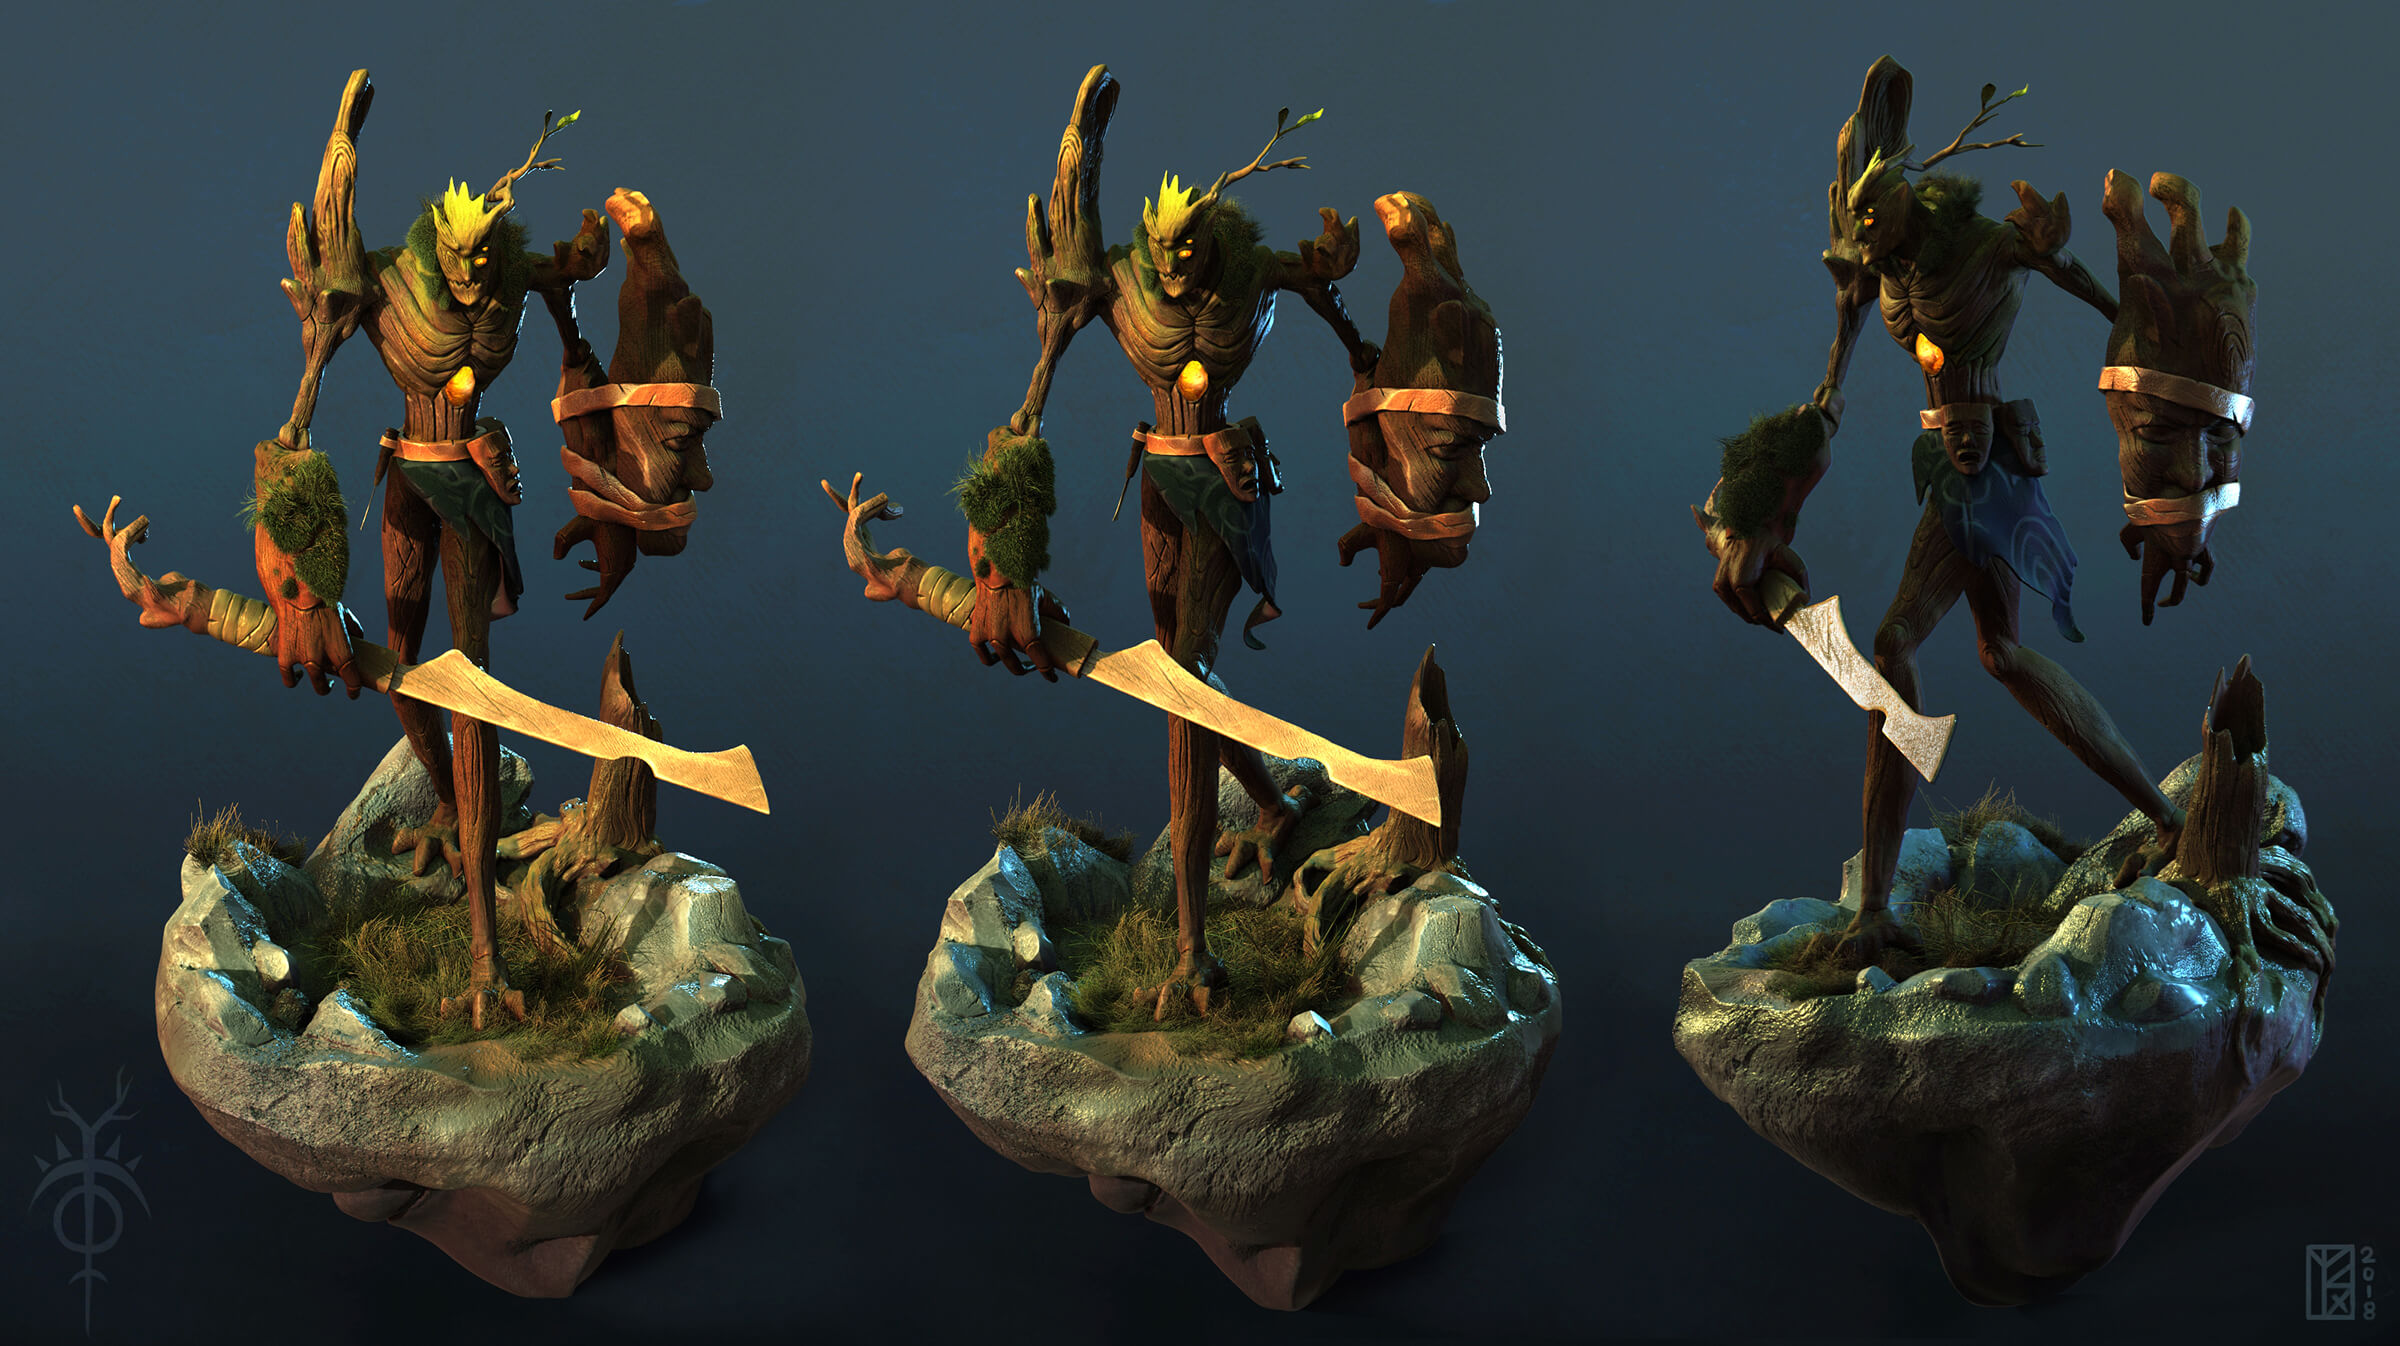 Multiple views of a wooden creature carrying a wooden sword